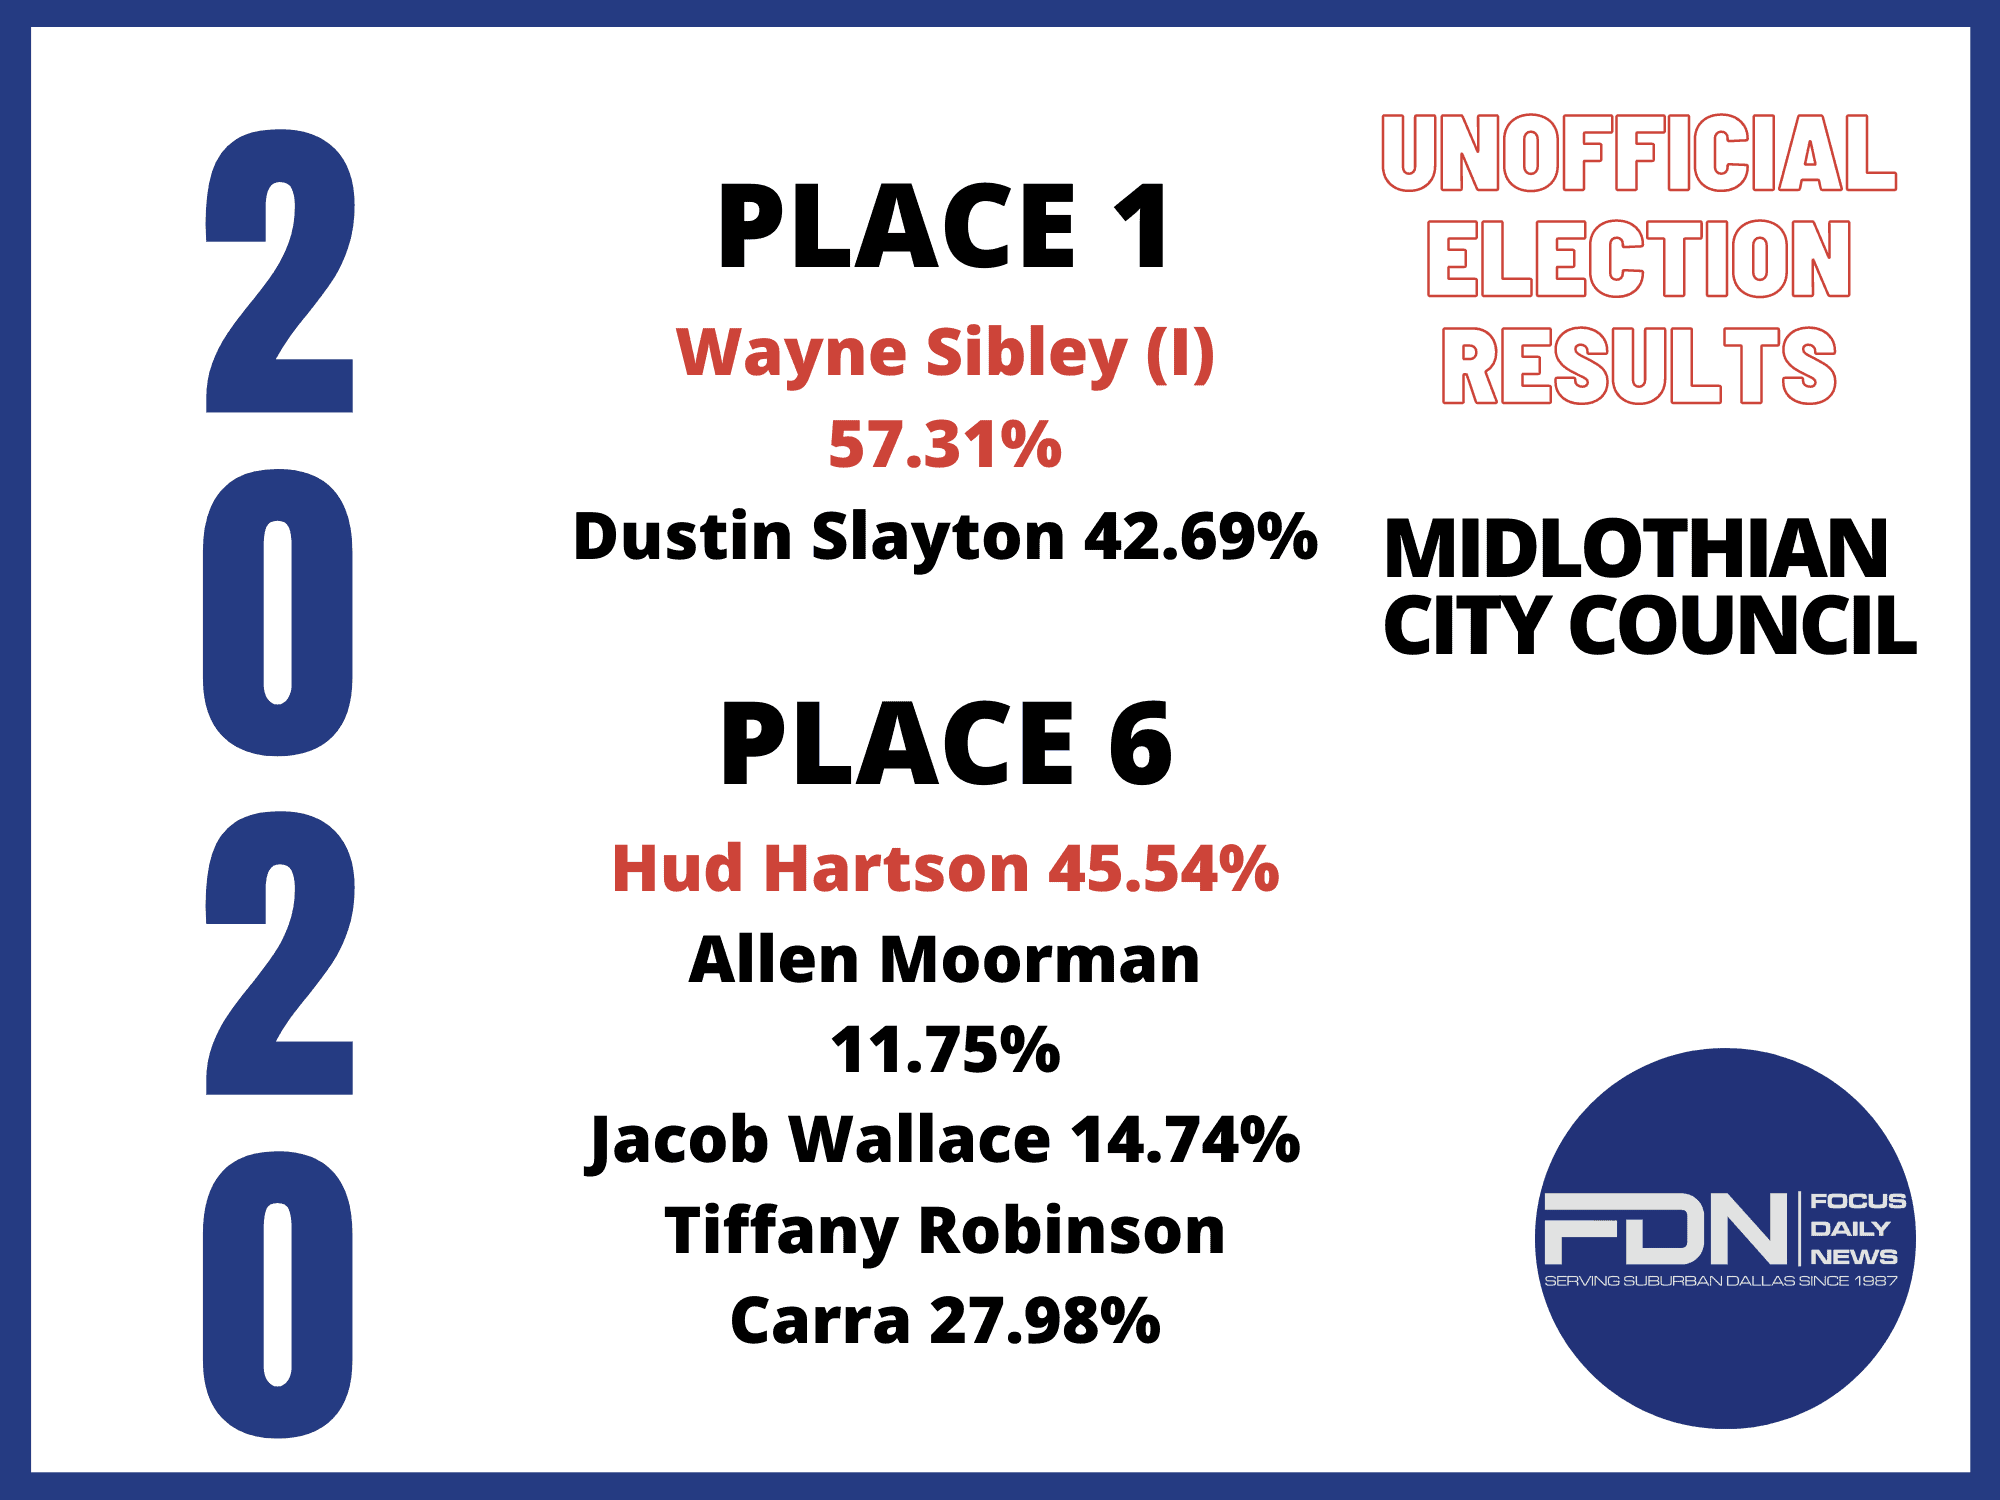 Midlothian City Council ELection Results